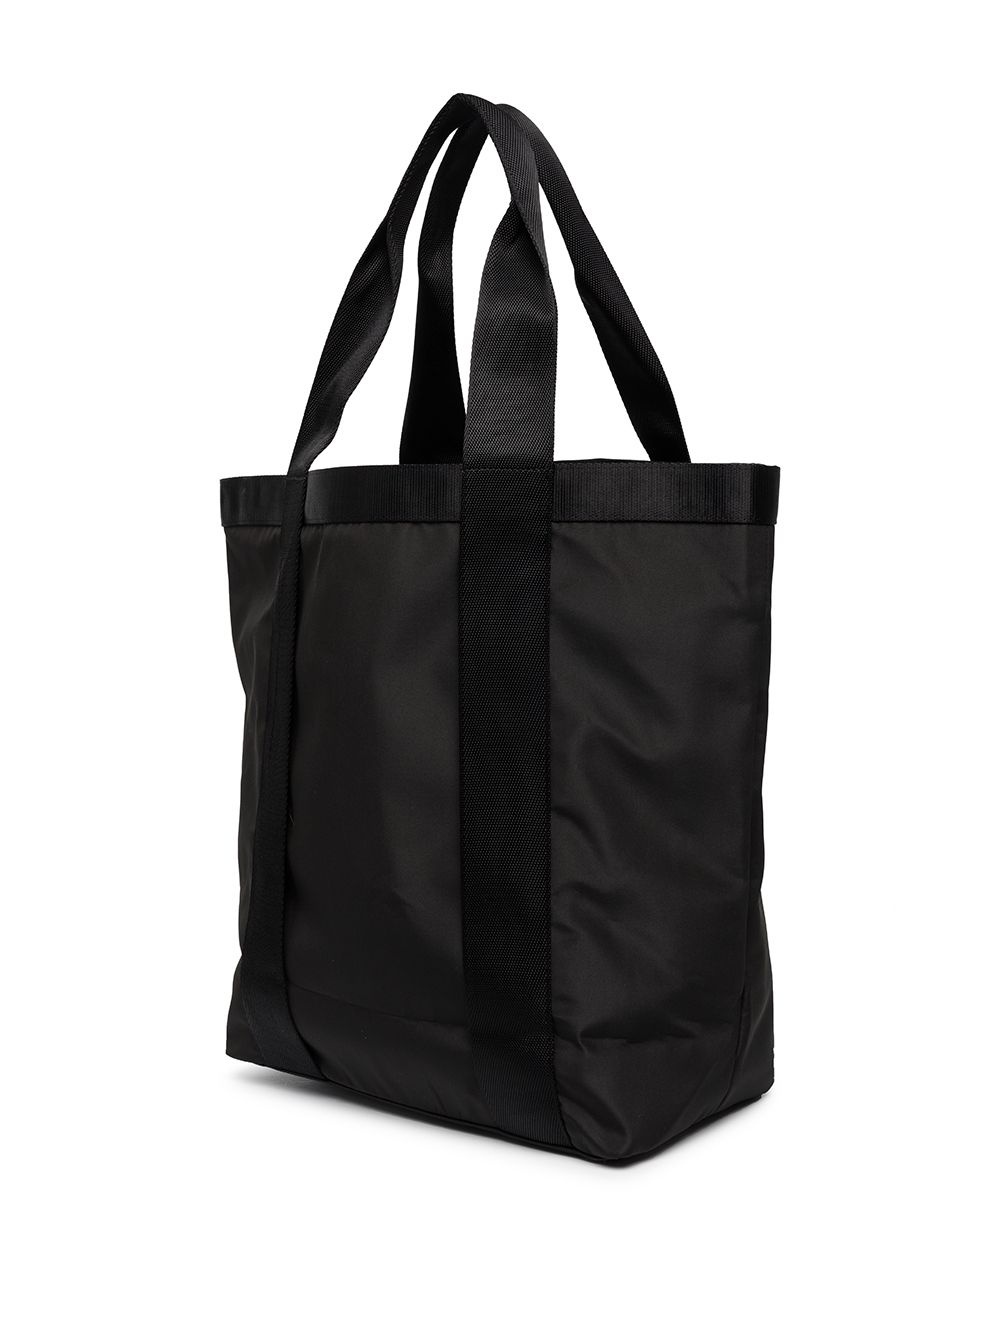 large recycled tote bag - 3